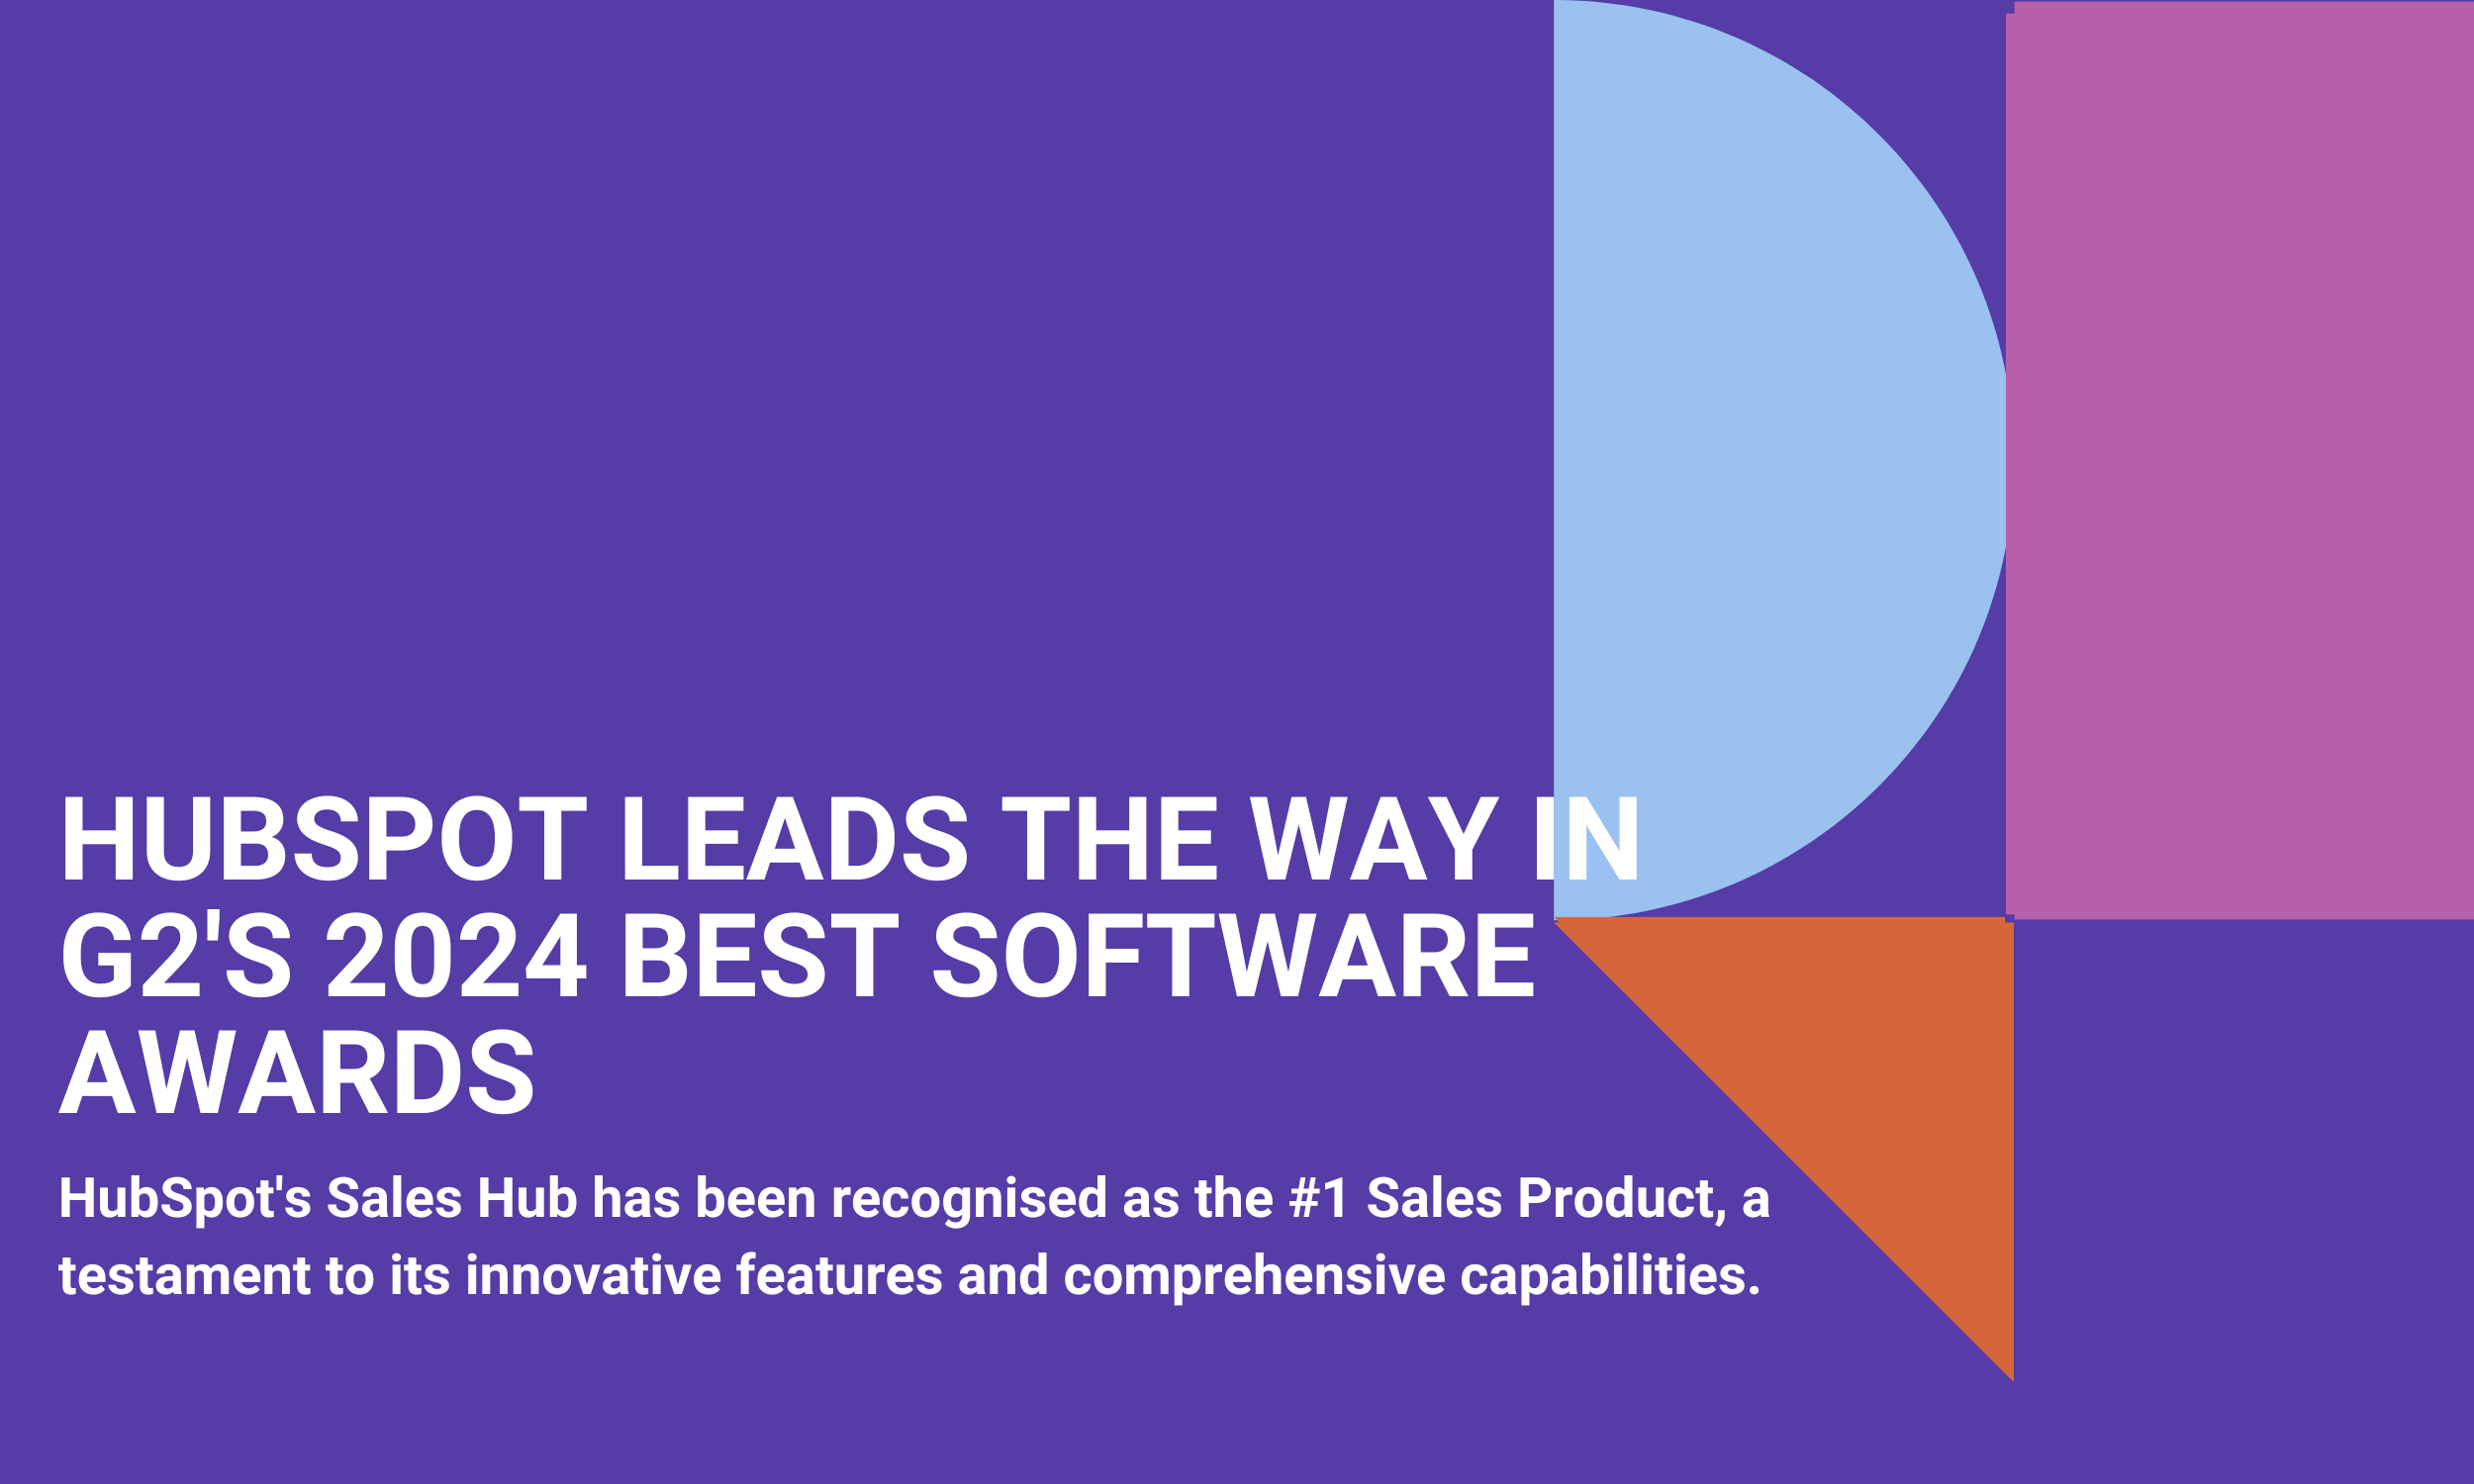 HubSpot Leads the Way in G2's 2024 Best Software Awards